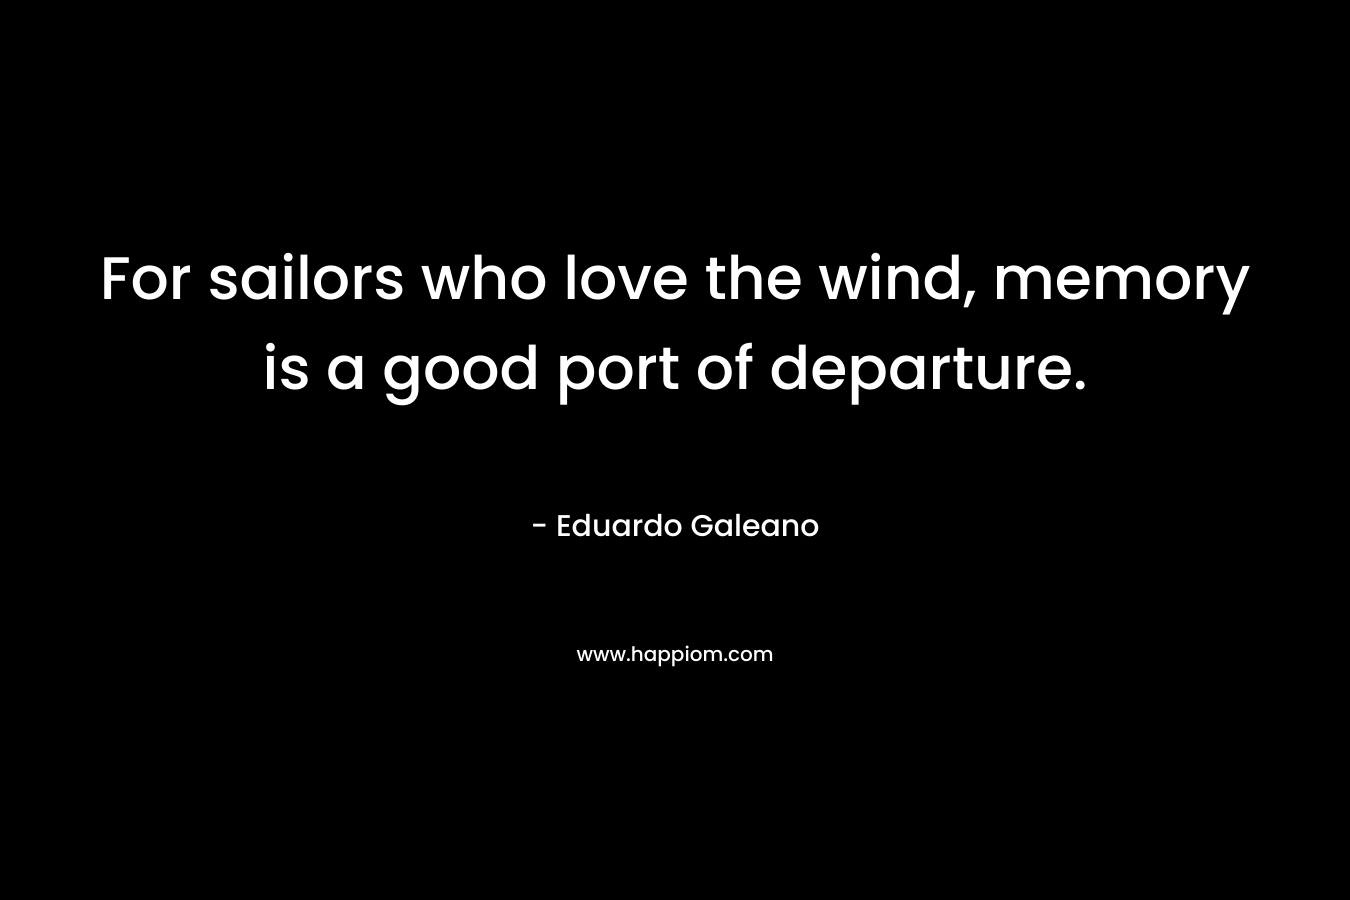 For sailors who love the wind, memory is a good port of departure.